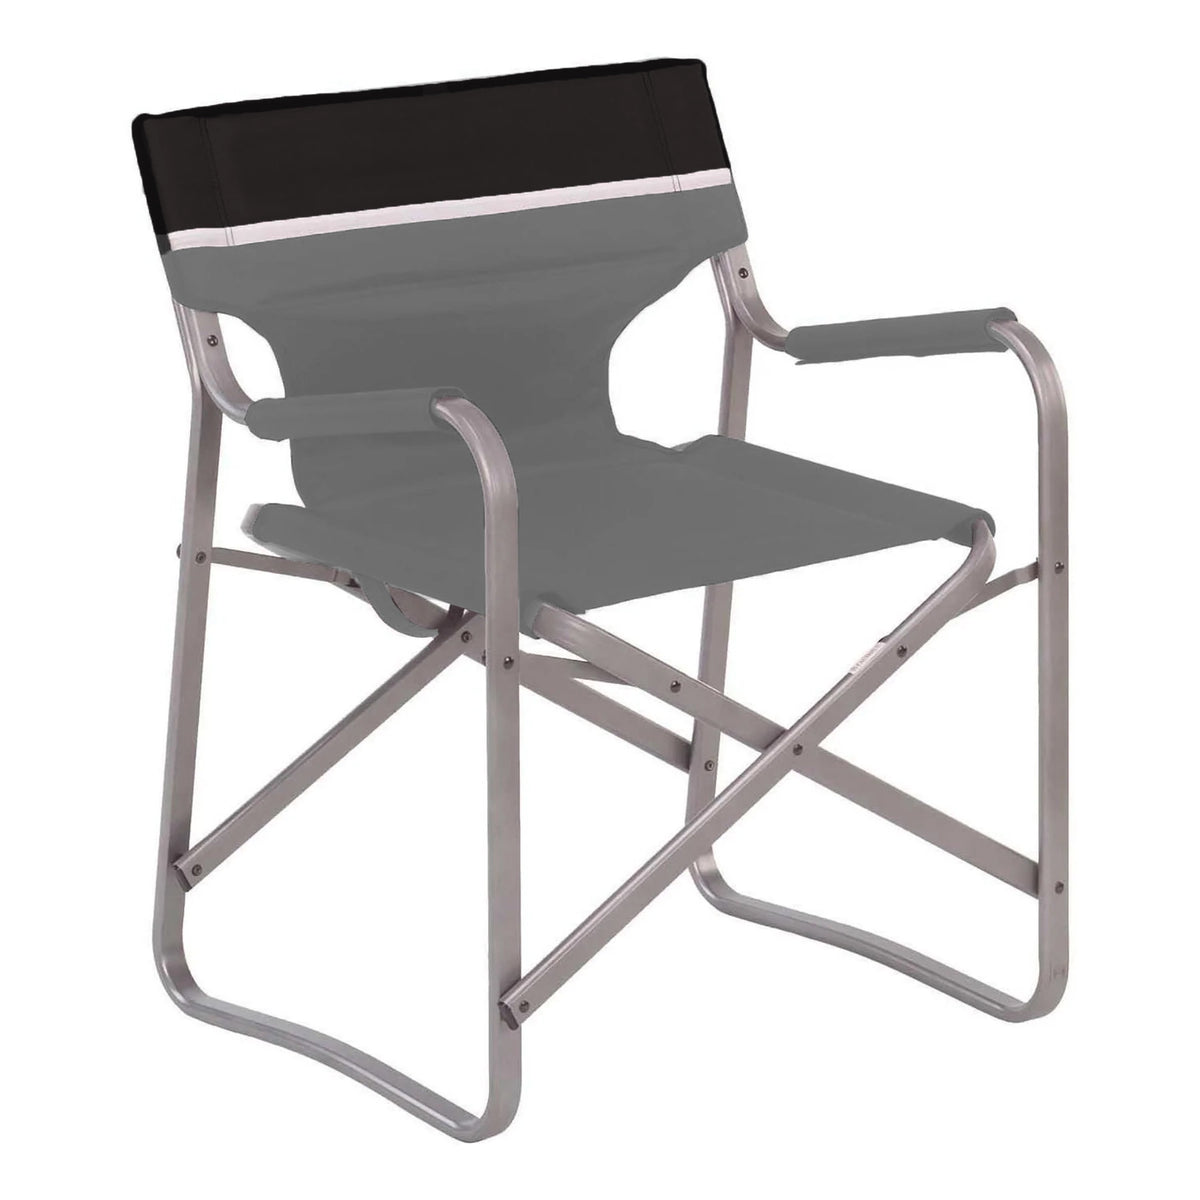 Camping chair - grey